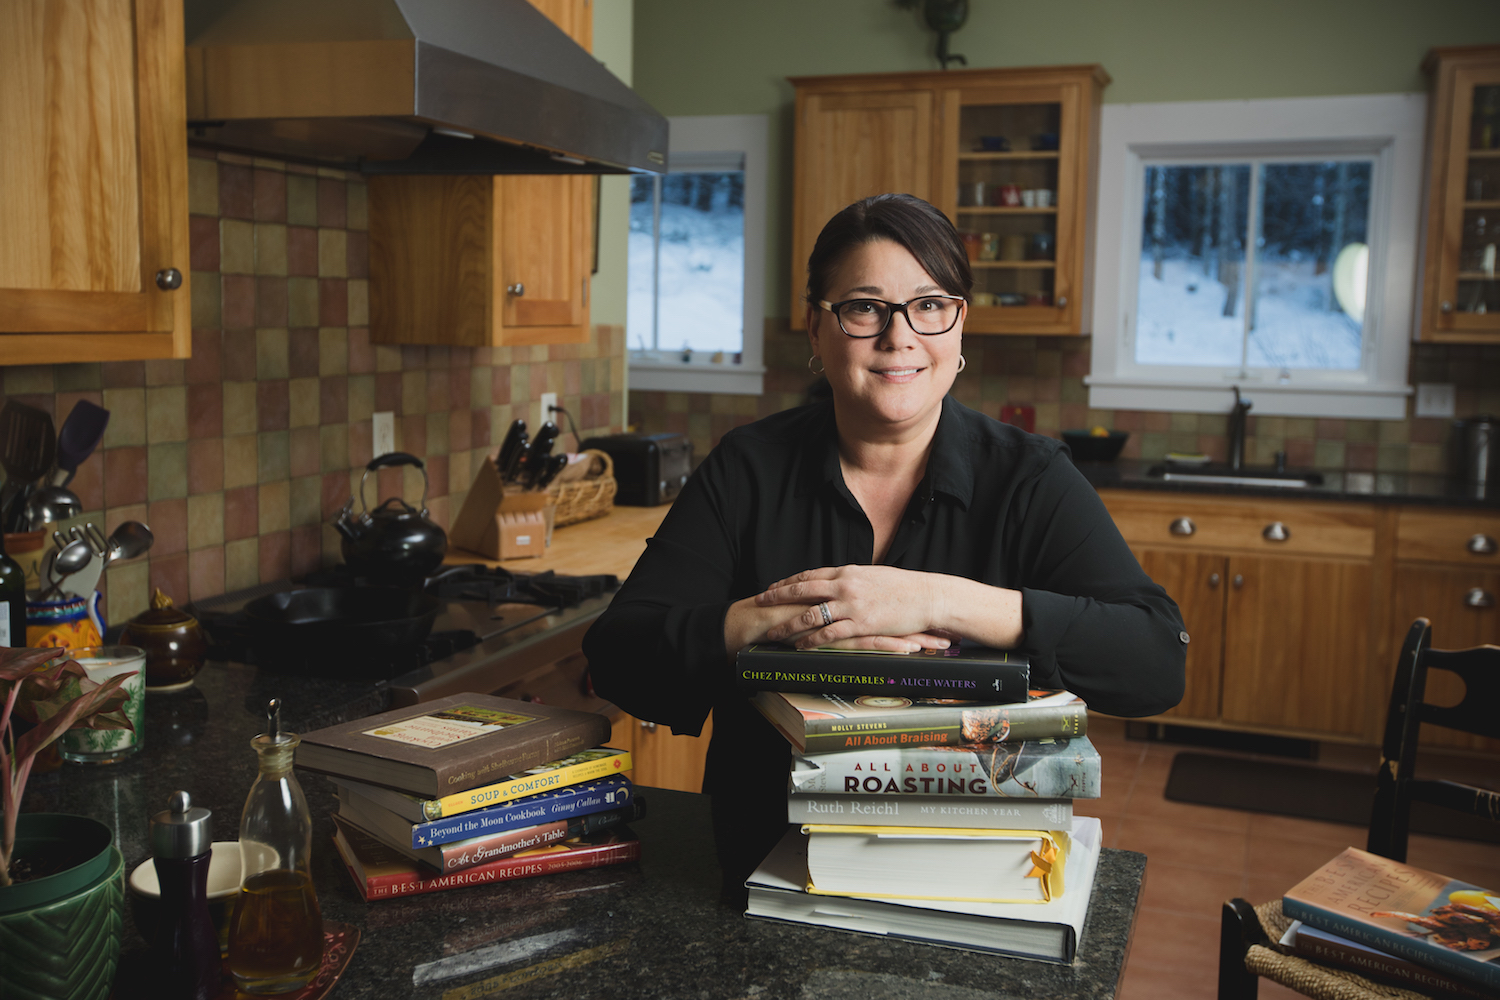 Milissa Frost is a recipe tester living in Underhill, Vermont.